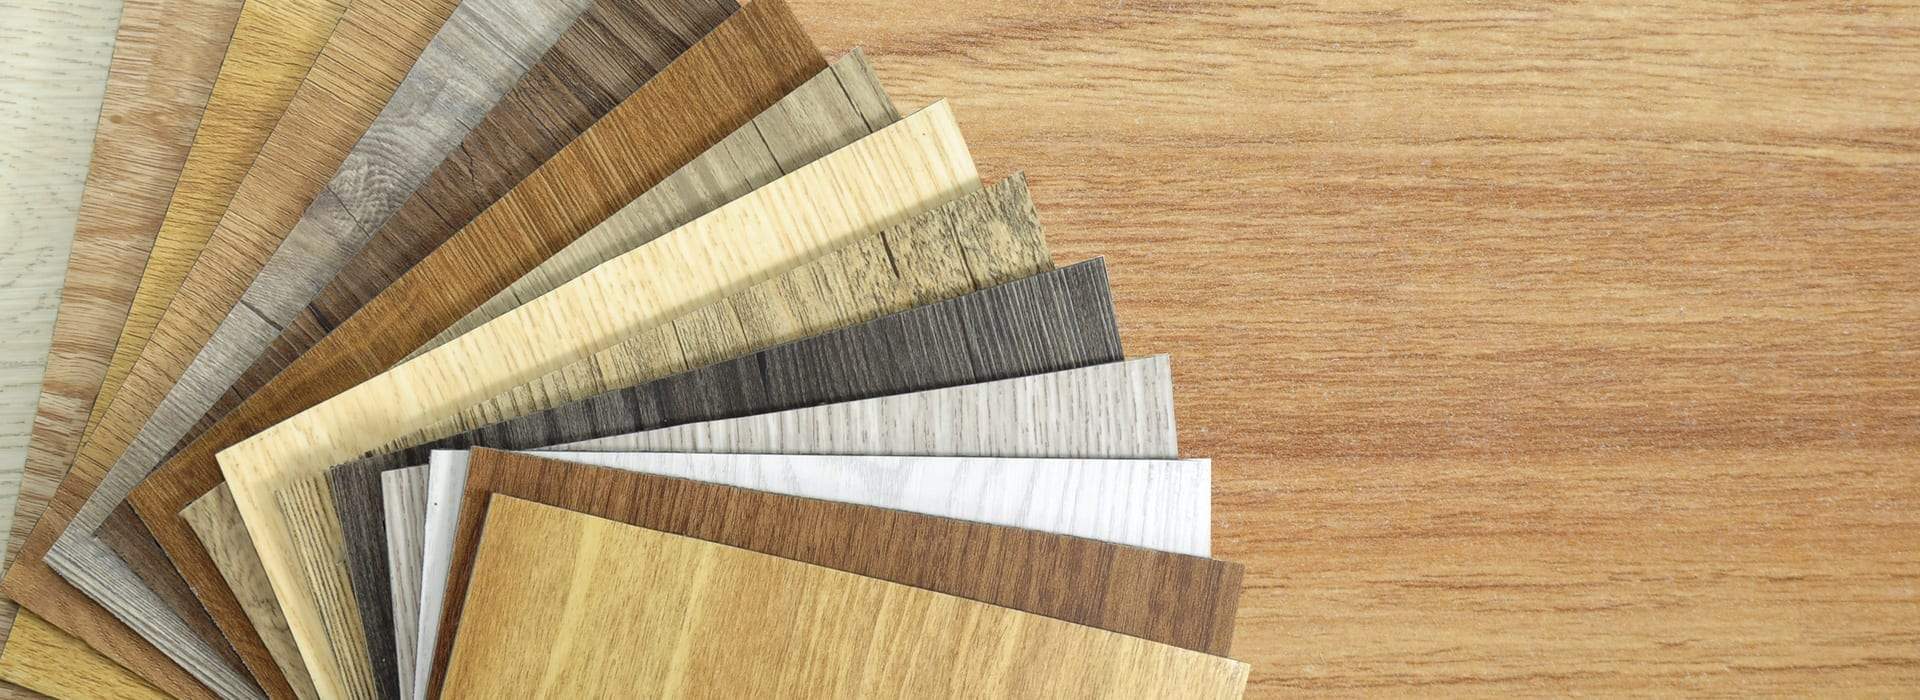 Five Reasons Why Your Flooring Should Be Installed By Professionals